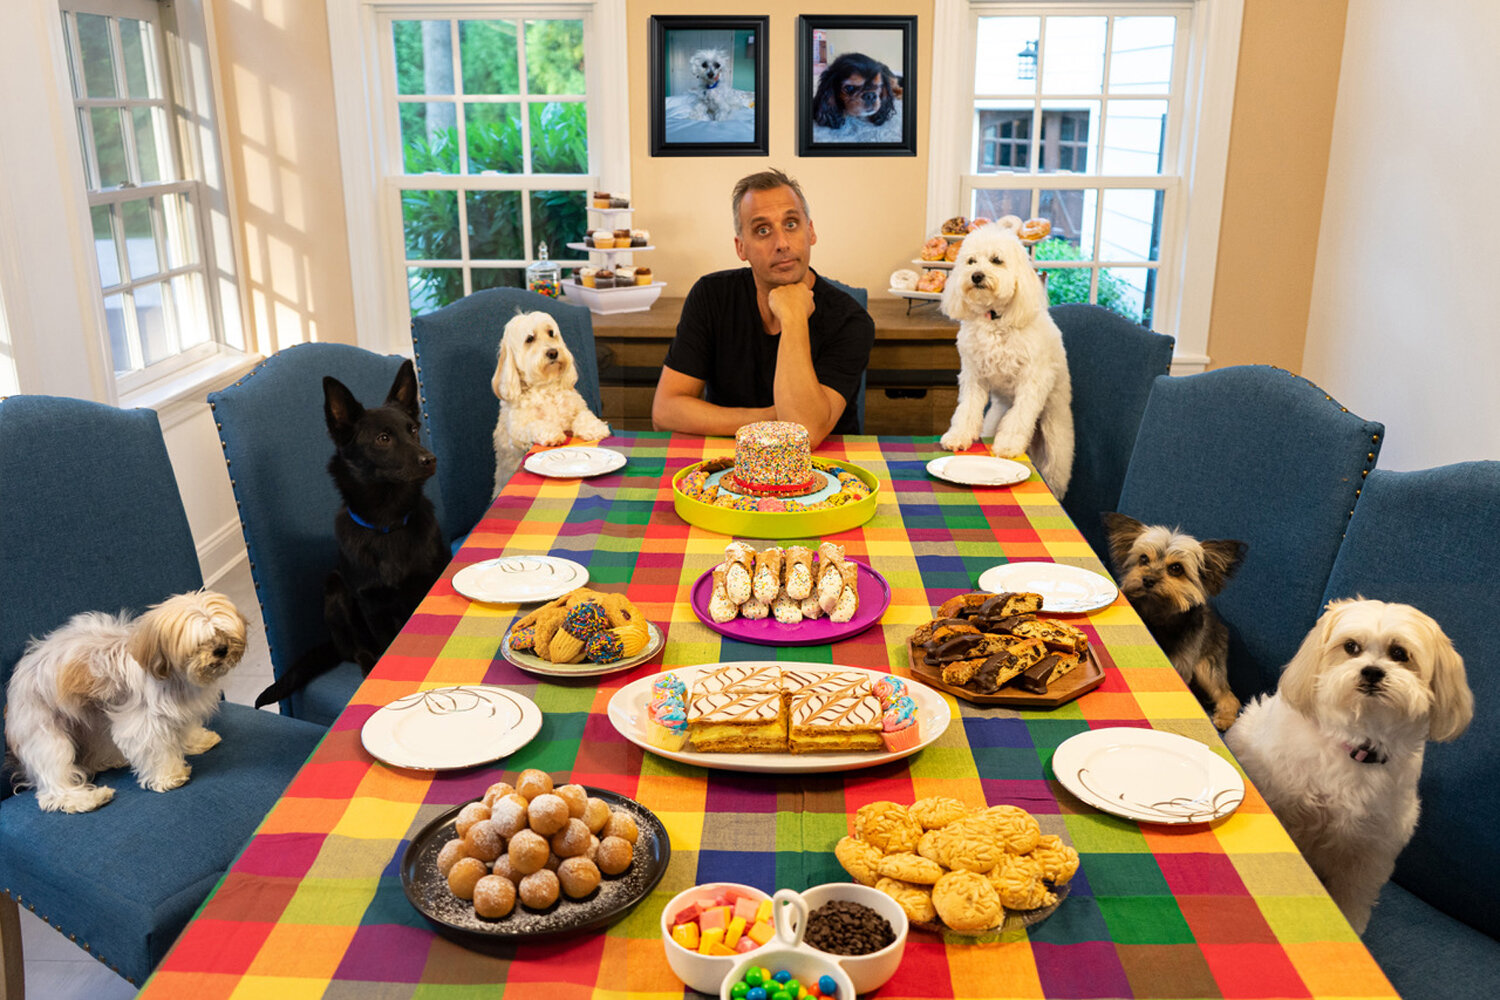 Joe lives his life by a code of pastry and family, loving his wife, two children, cannolis — and his dogs.